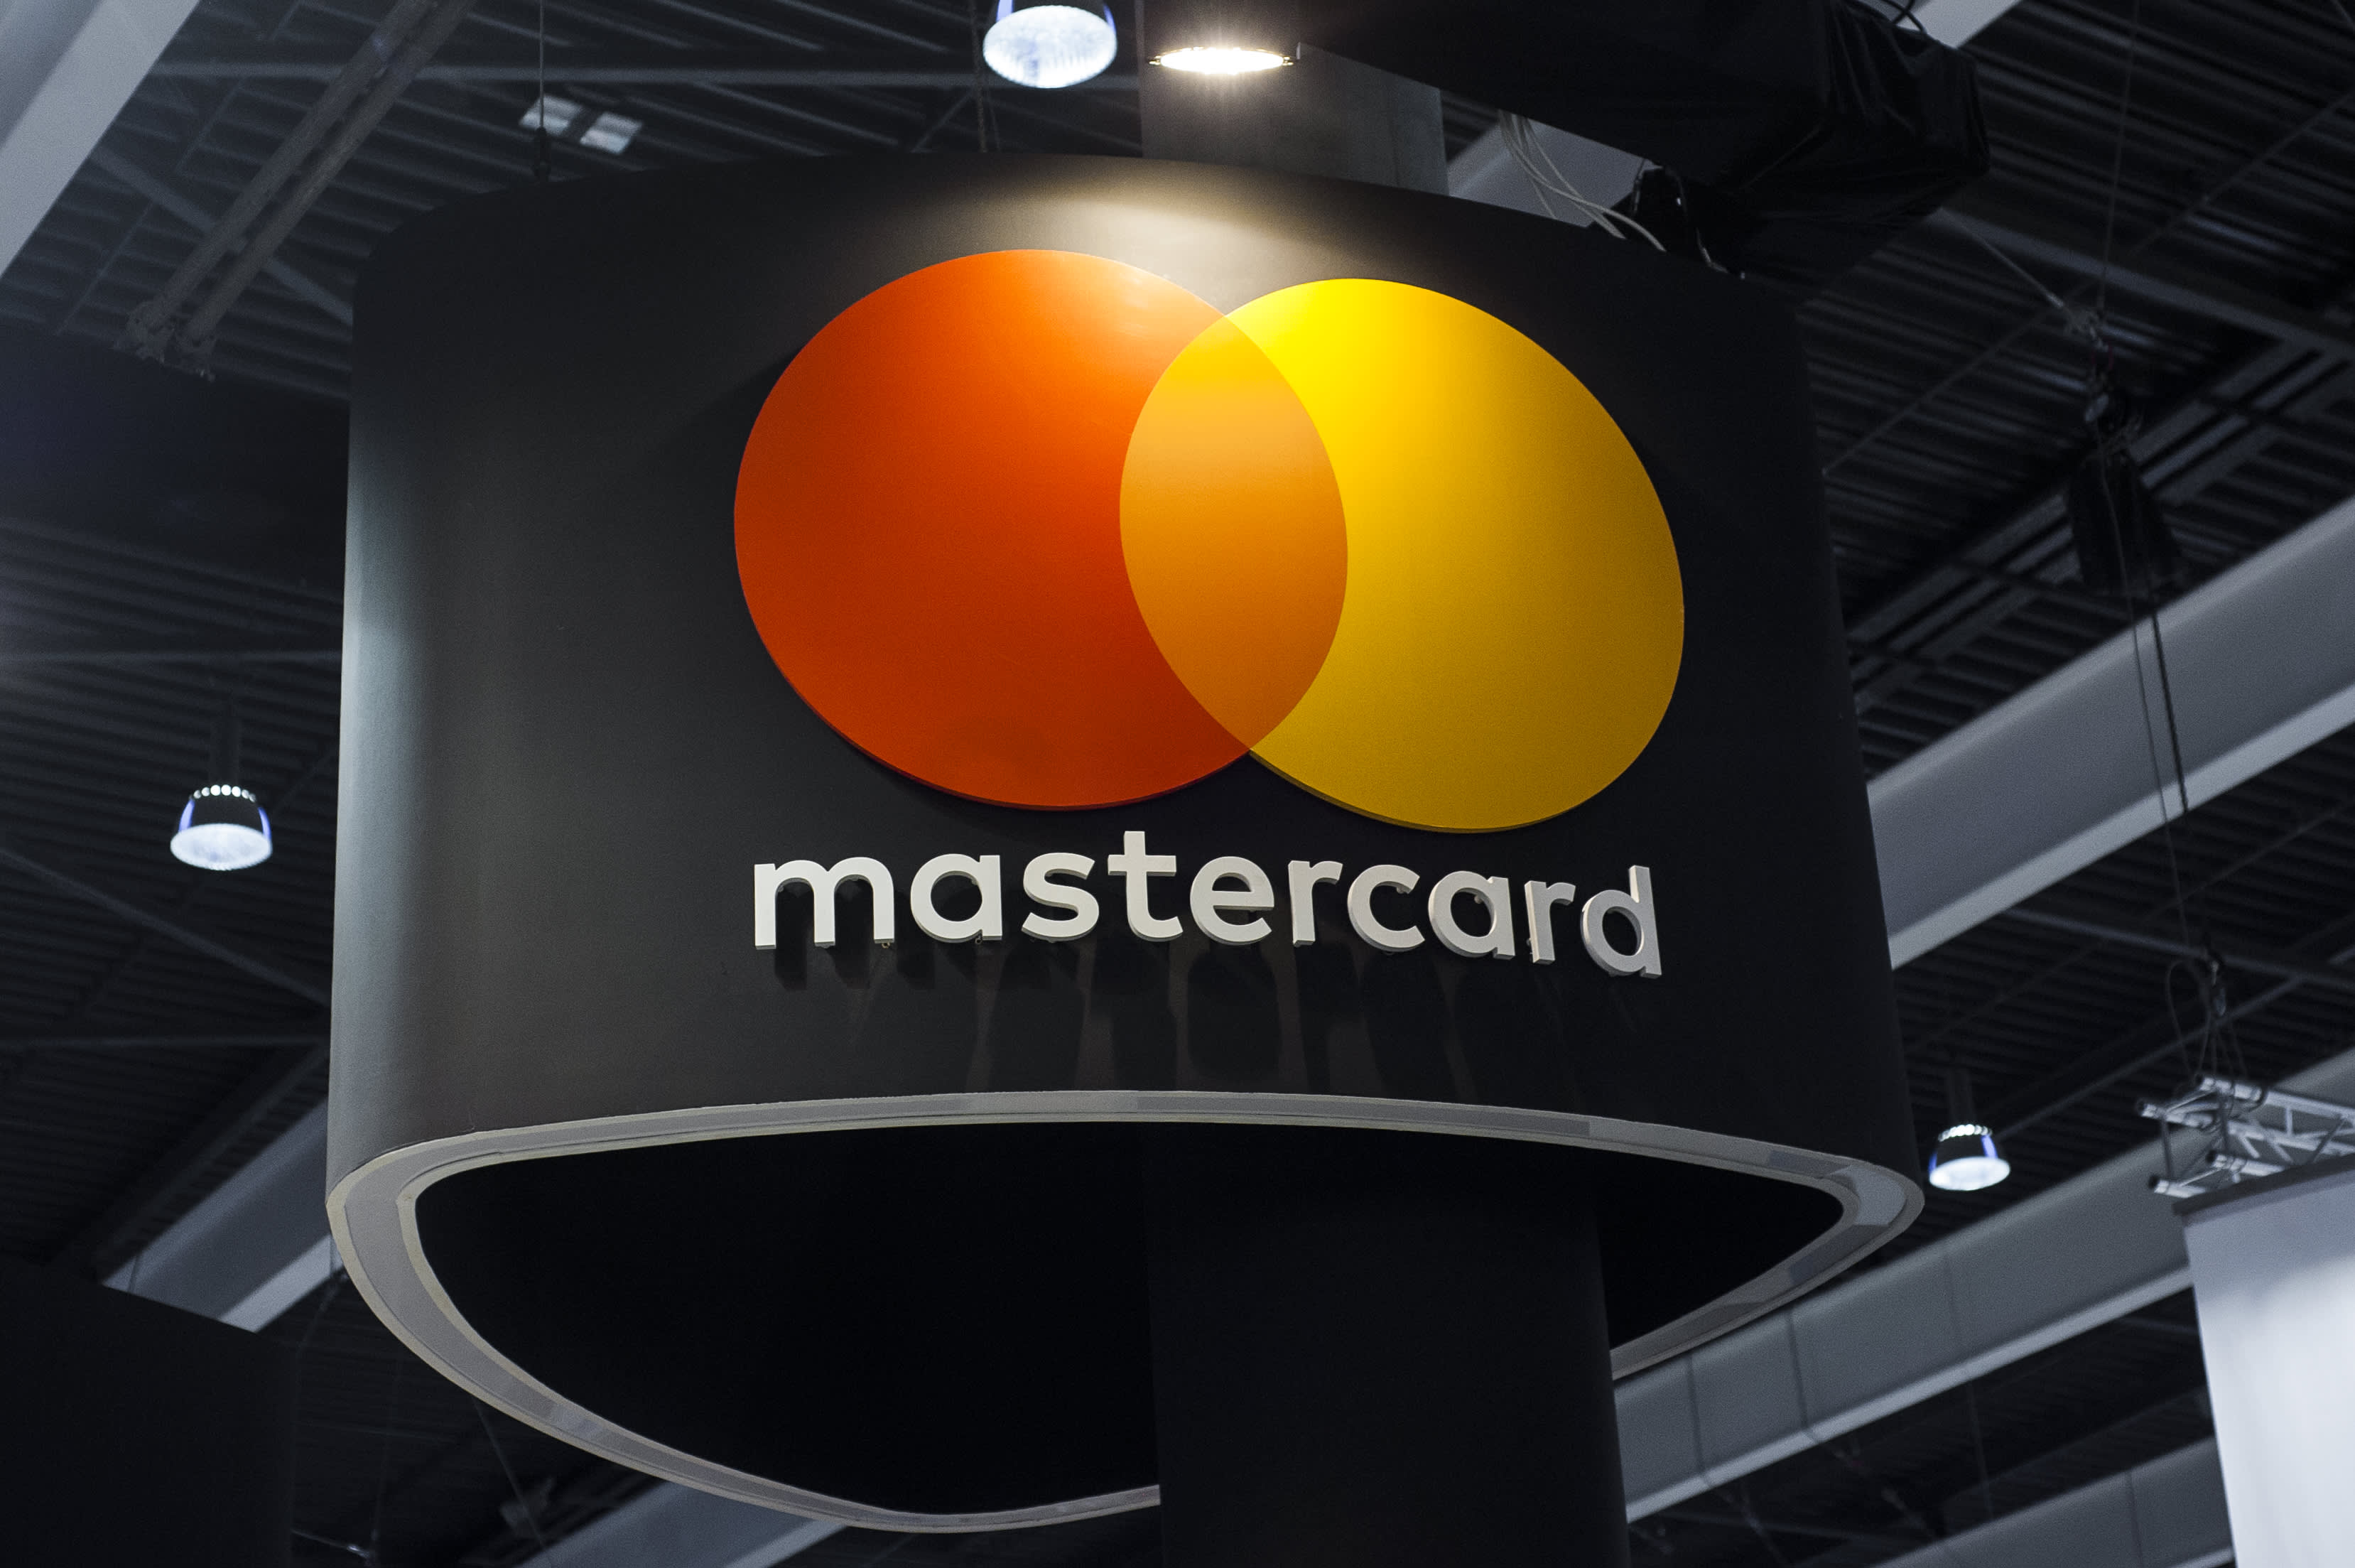 Mastercard says widespread adoption of CBDCs will be “difficult” for now